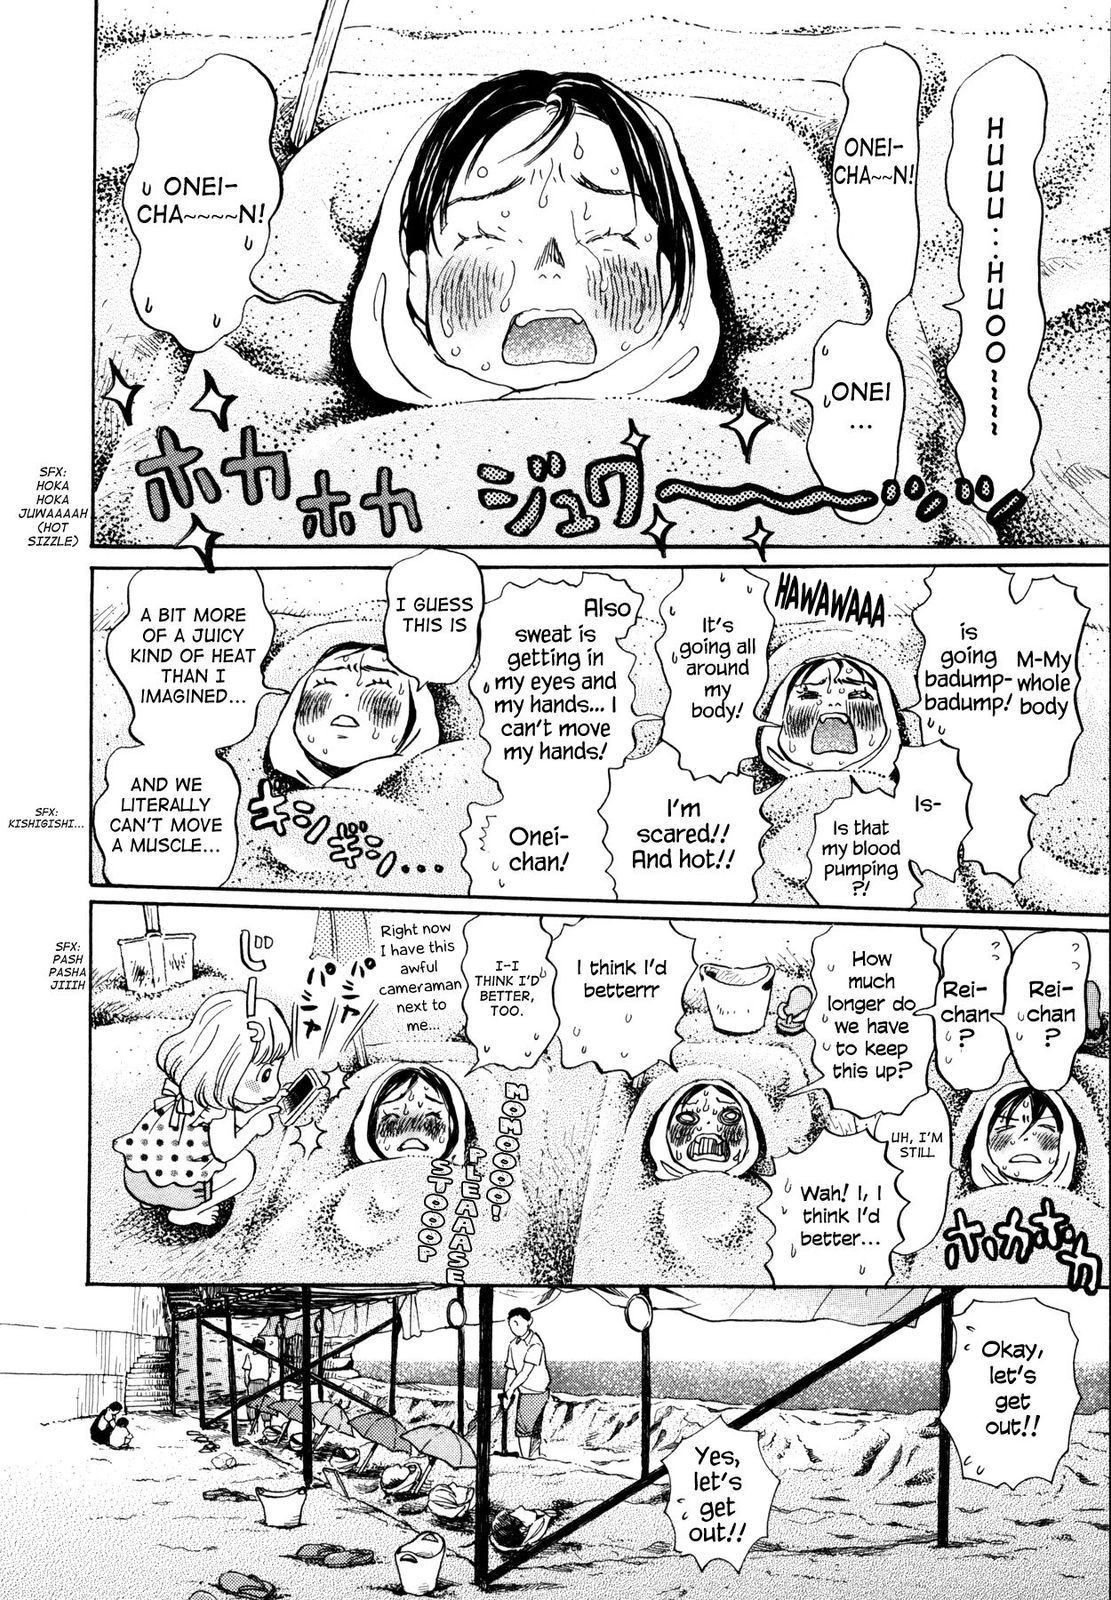 March Comes in Like a Lion, Chapter 120 The Satsuma Arc (Part 4) (EN) image 02